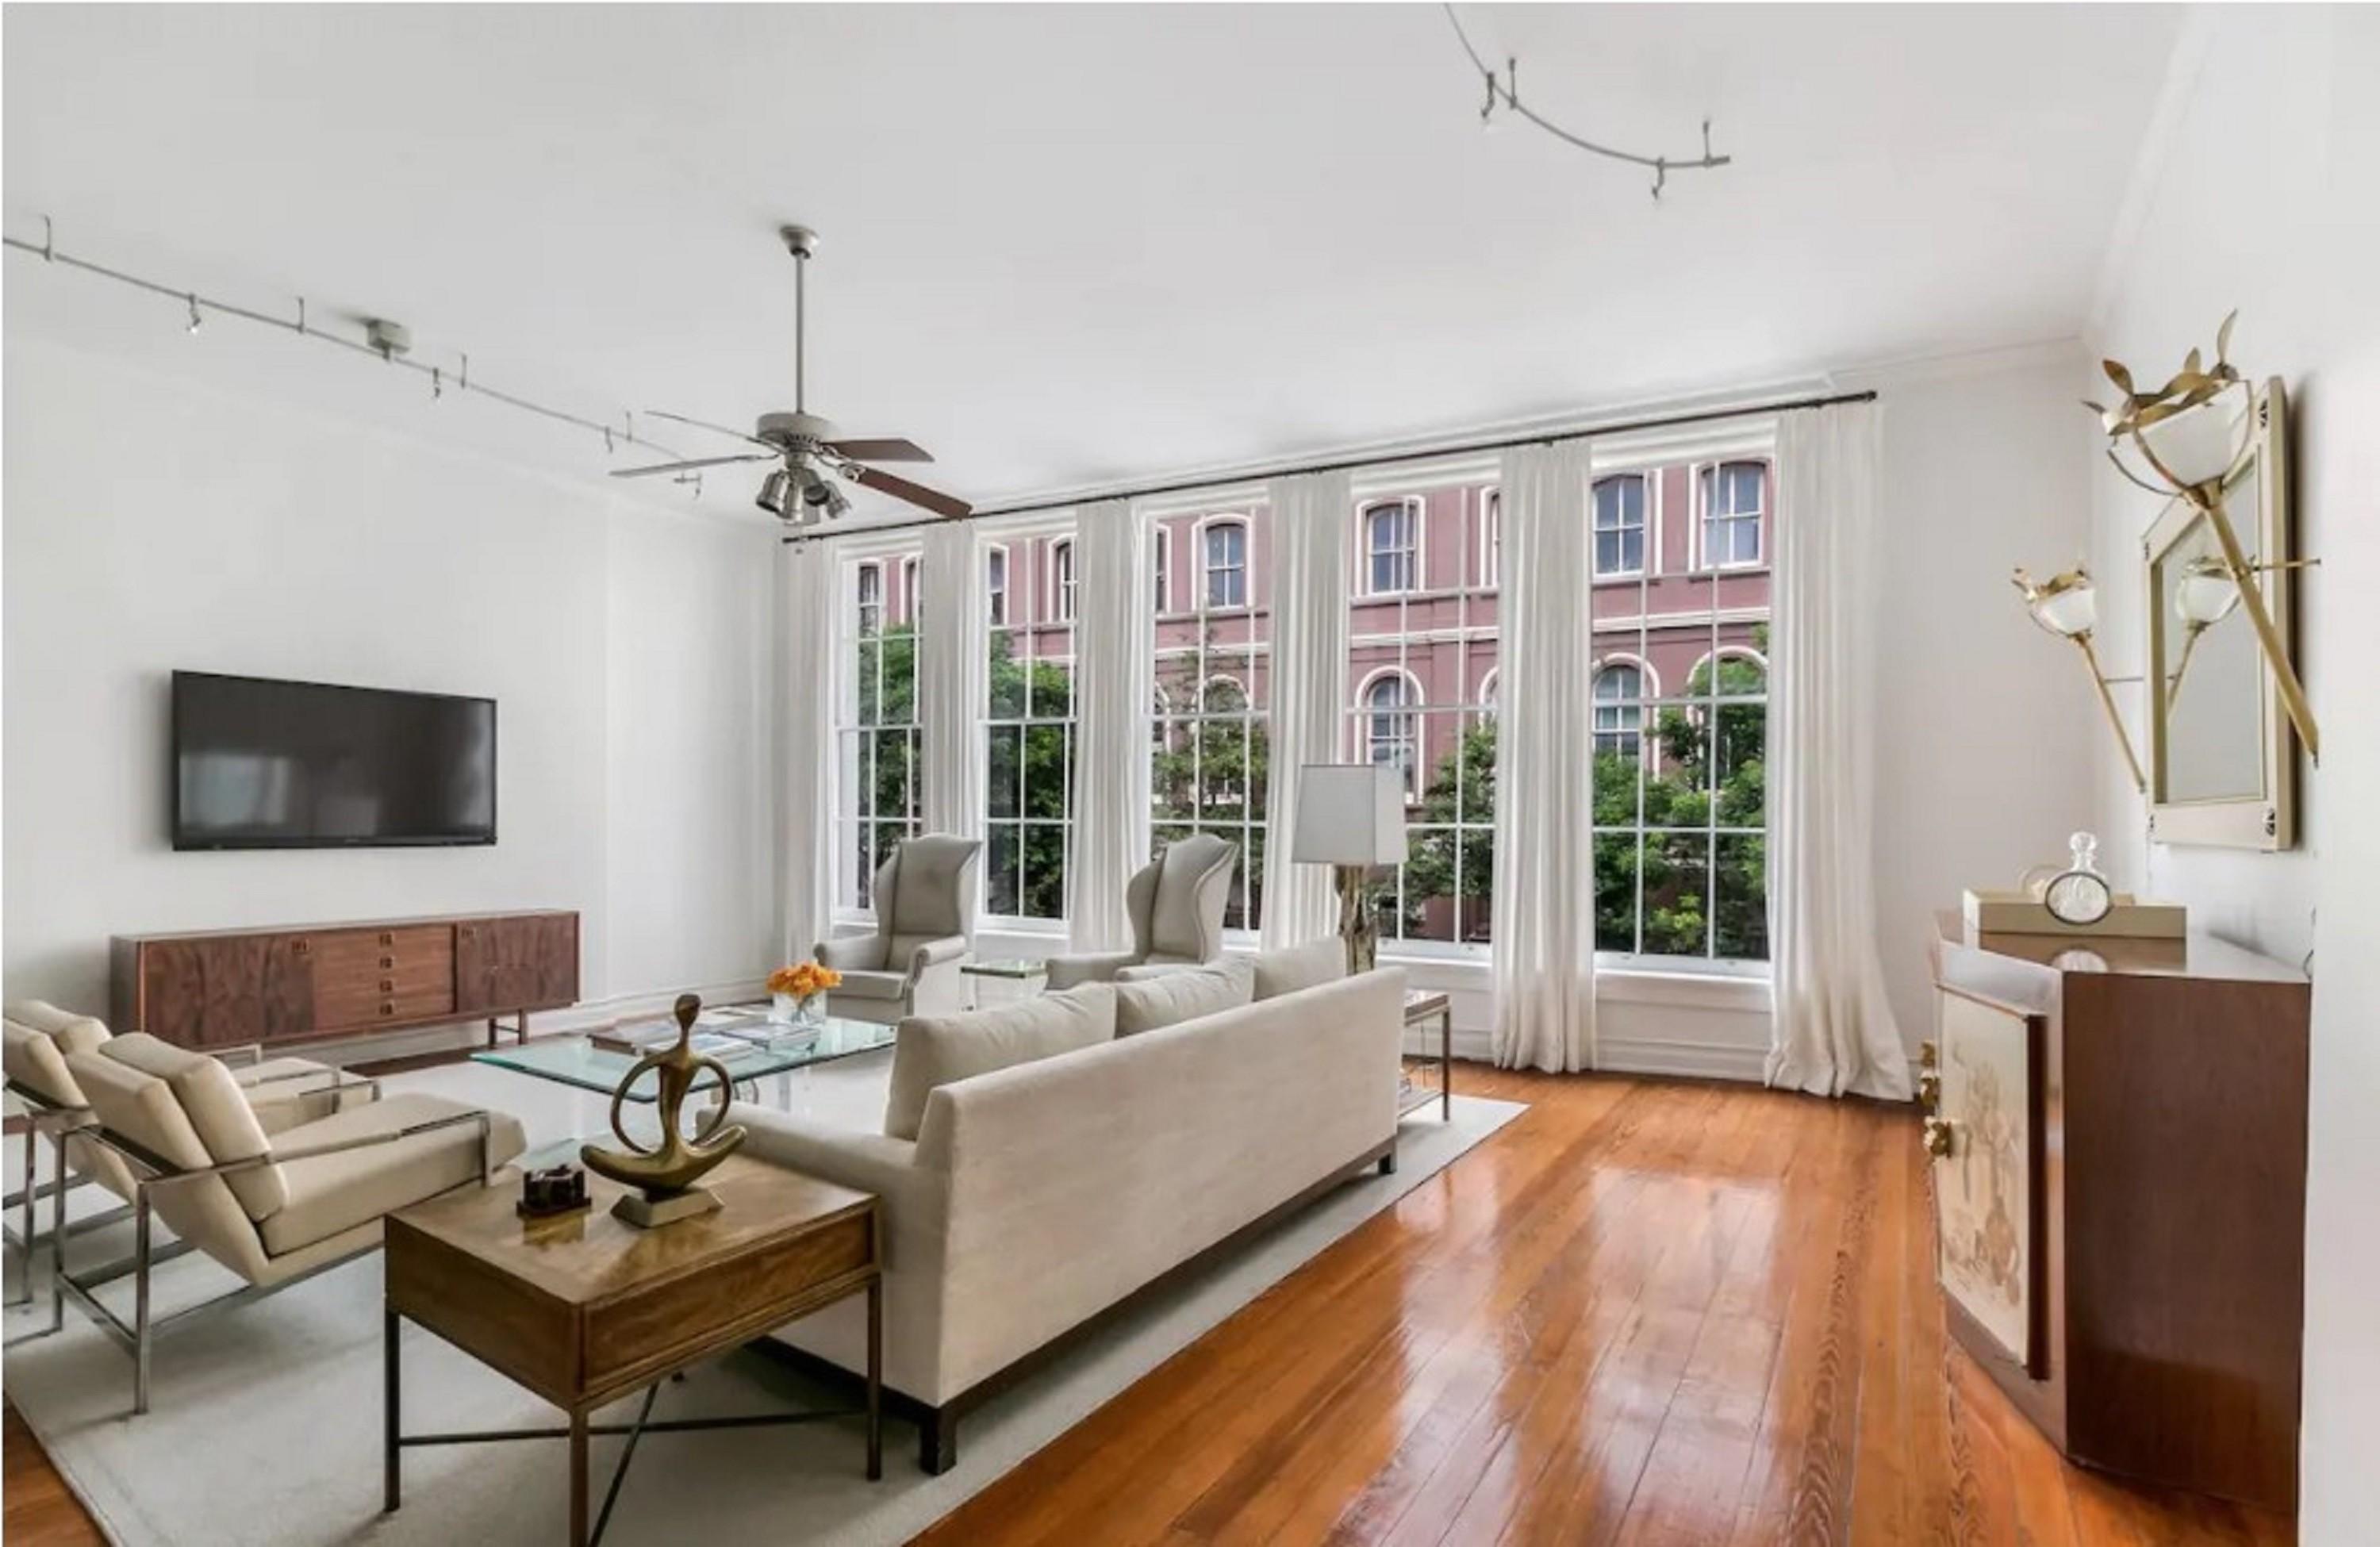 Luxury Baronne Street Apt with Private Rooftop Deck